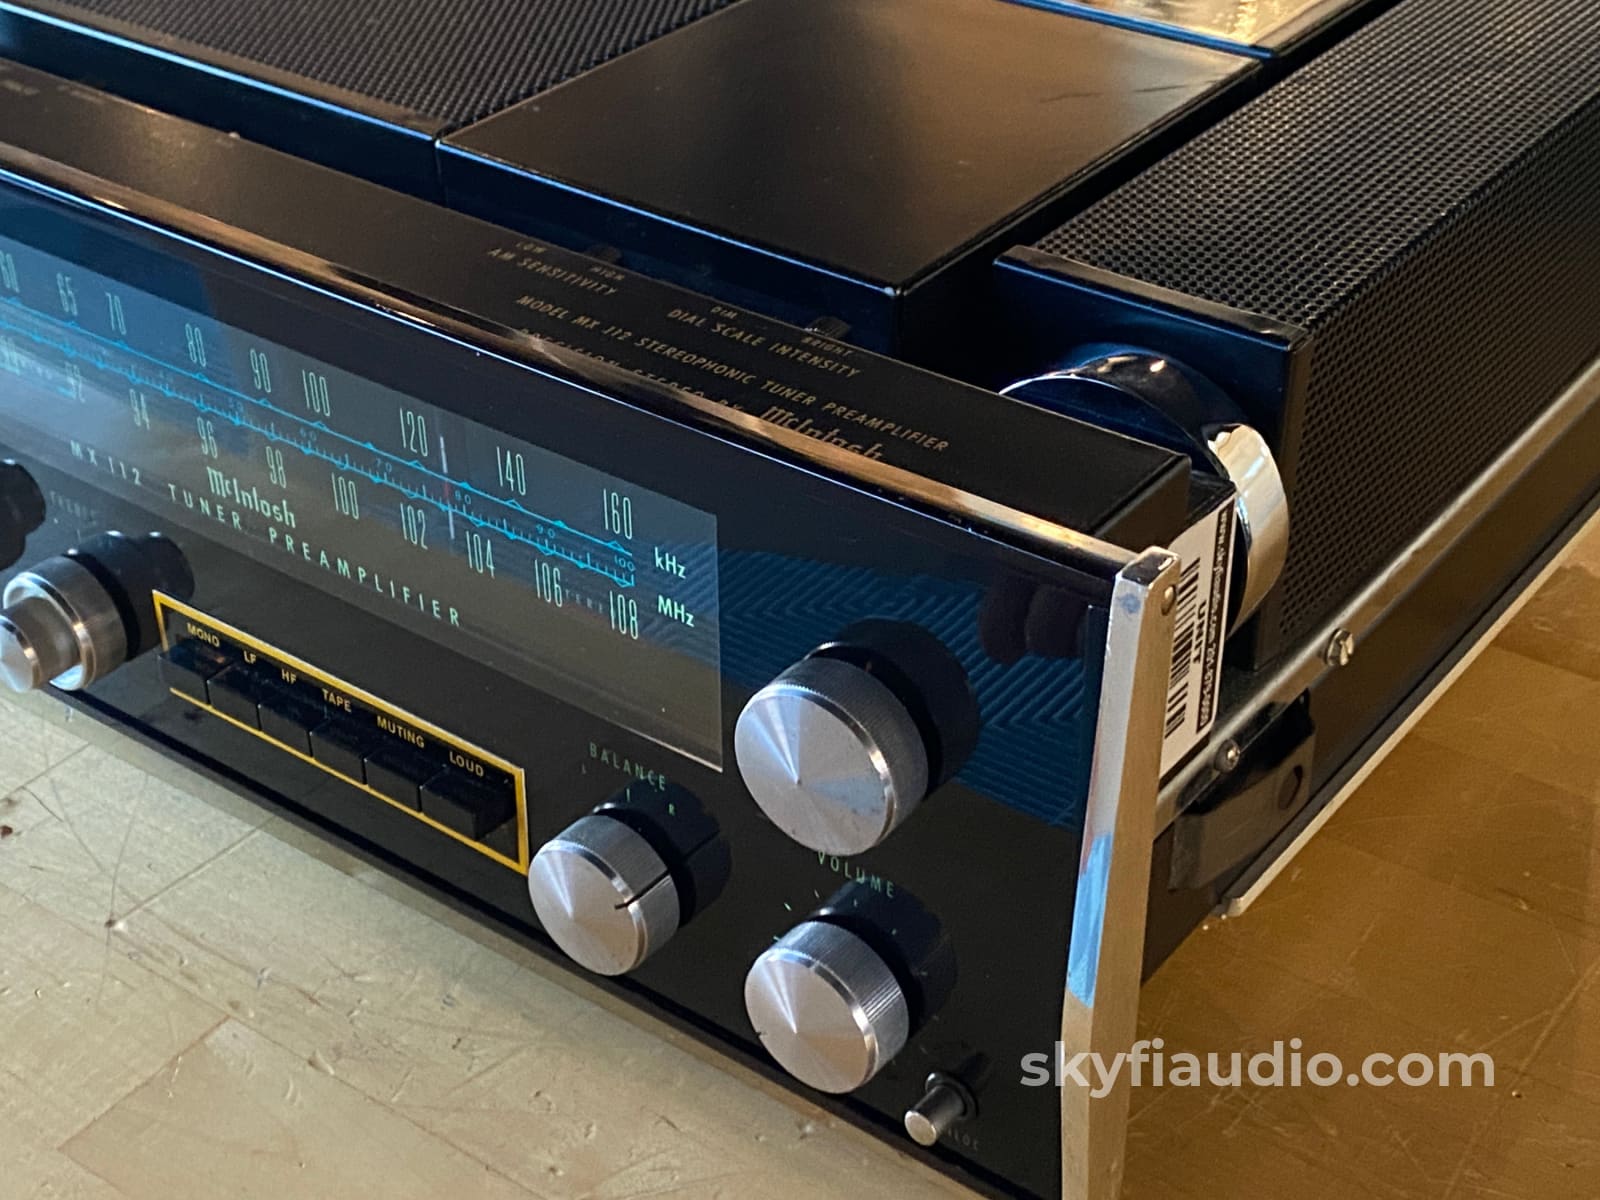 Mcintosh Mx112 Vintage Preamp From Abkco Music & Records - The Rolling Stones And More! Integrated